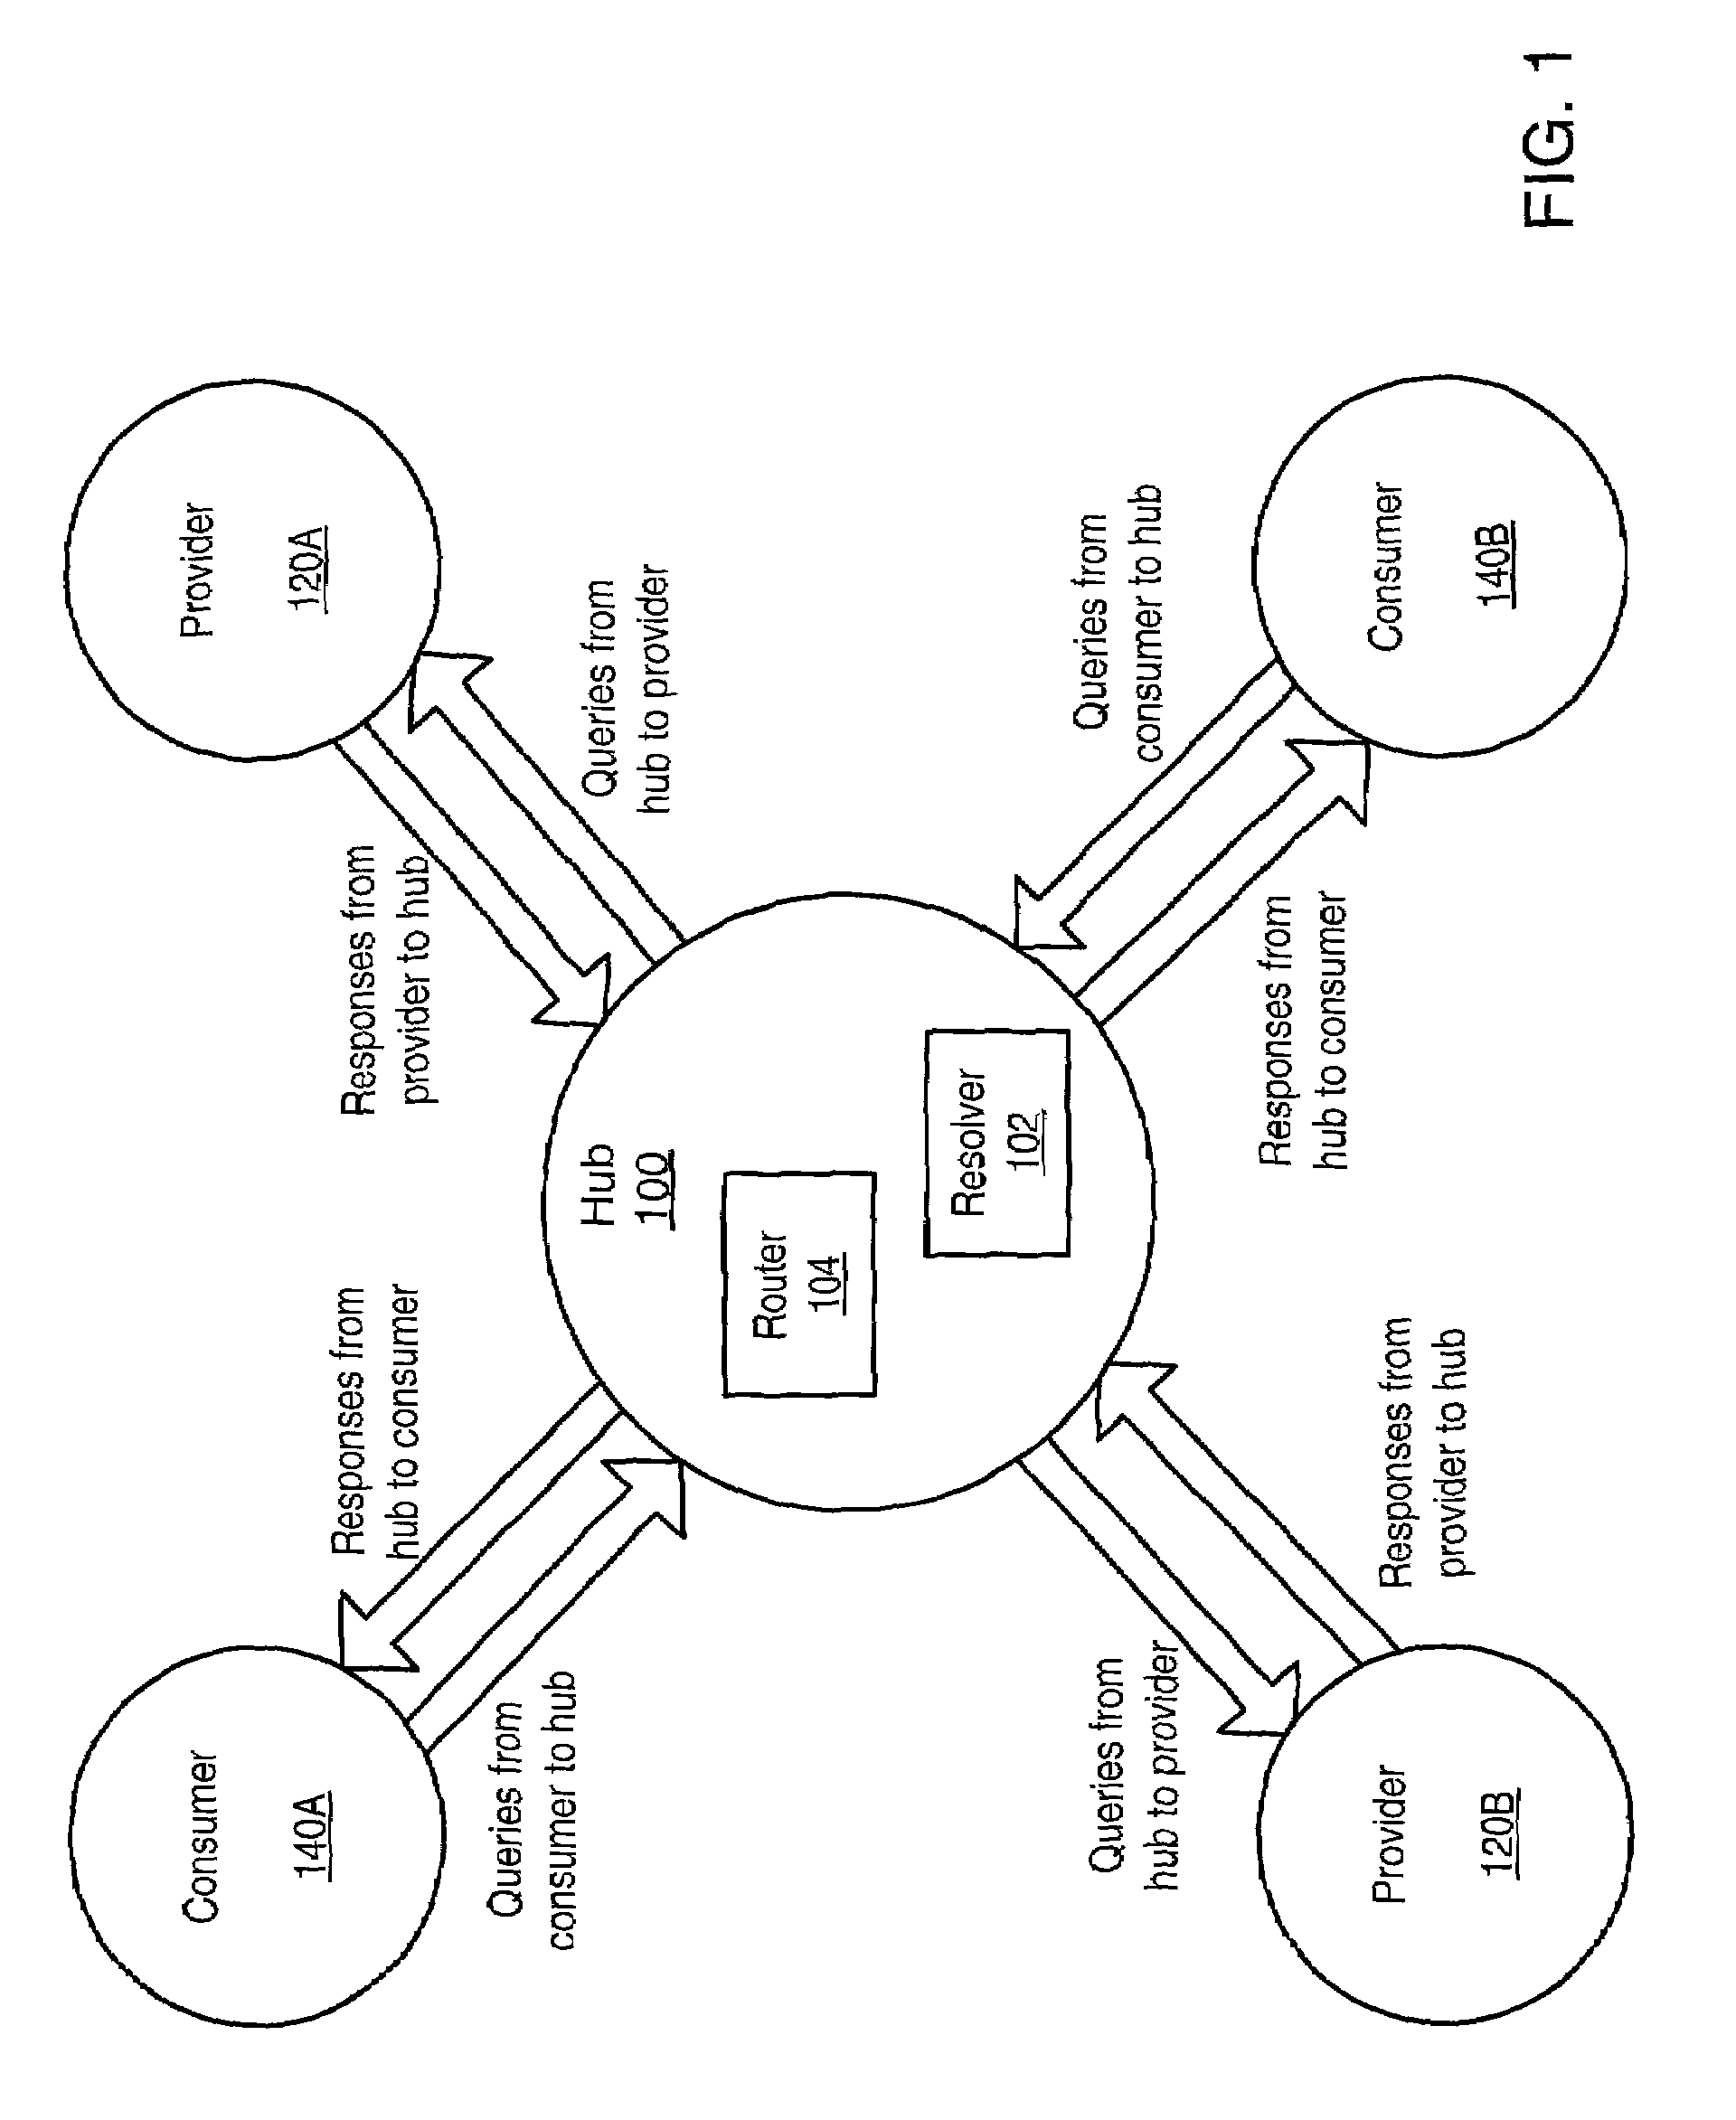 Distributed information discovery through searching selected registered information providers